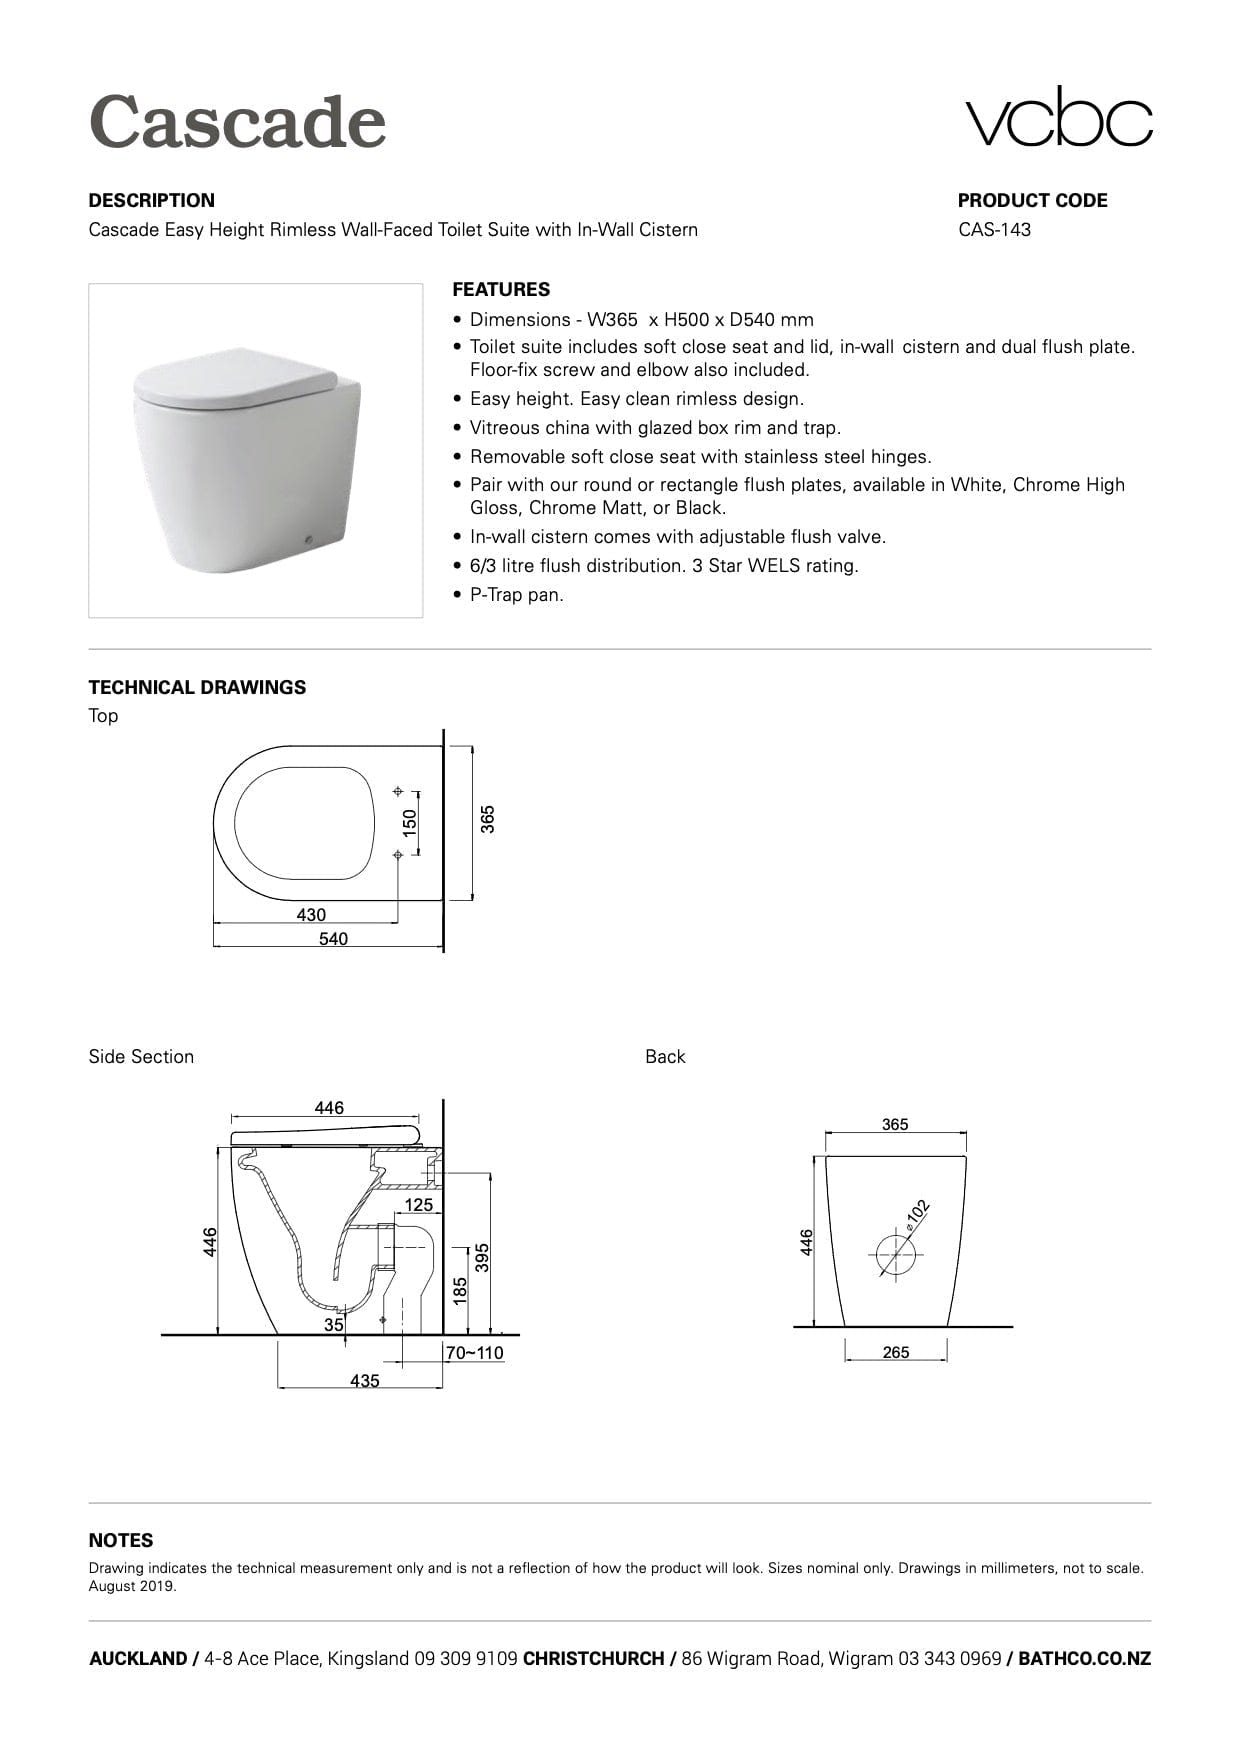 Bath & Co Toilet Suite VCBC Cascade Easy Height Rimless Wall-Faced Toilet Suite with Cistern & Flush Panel